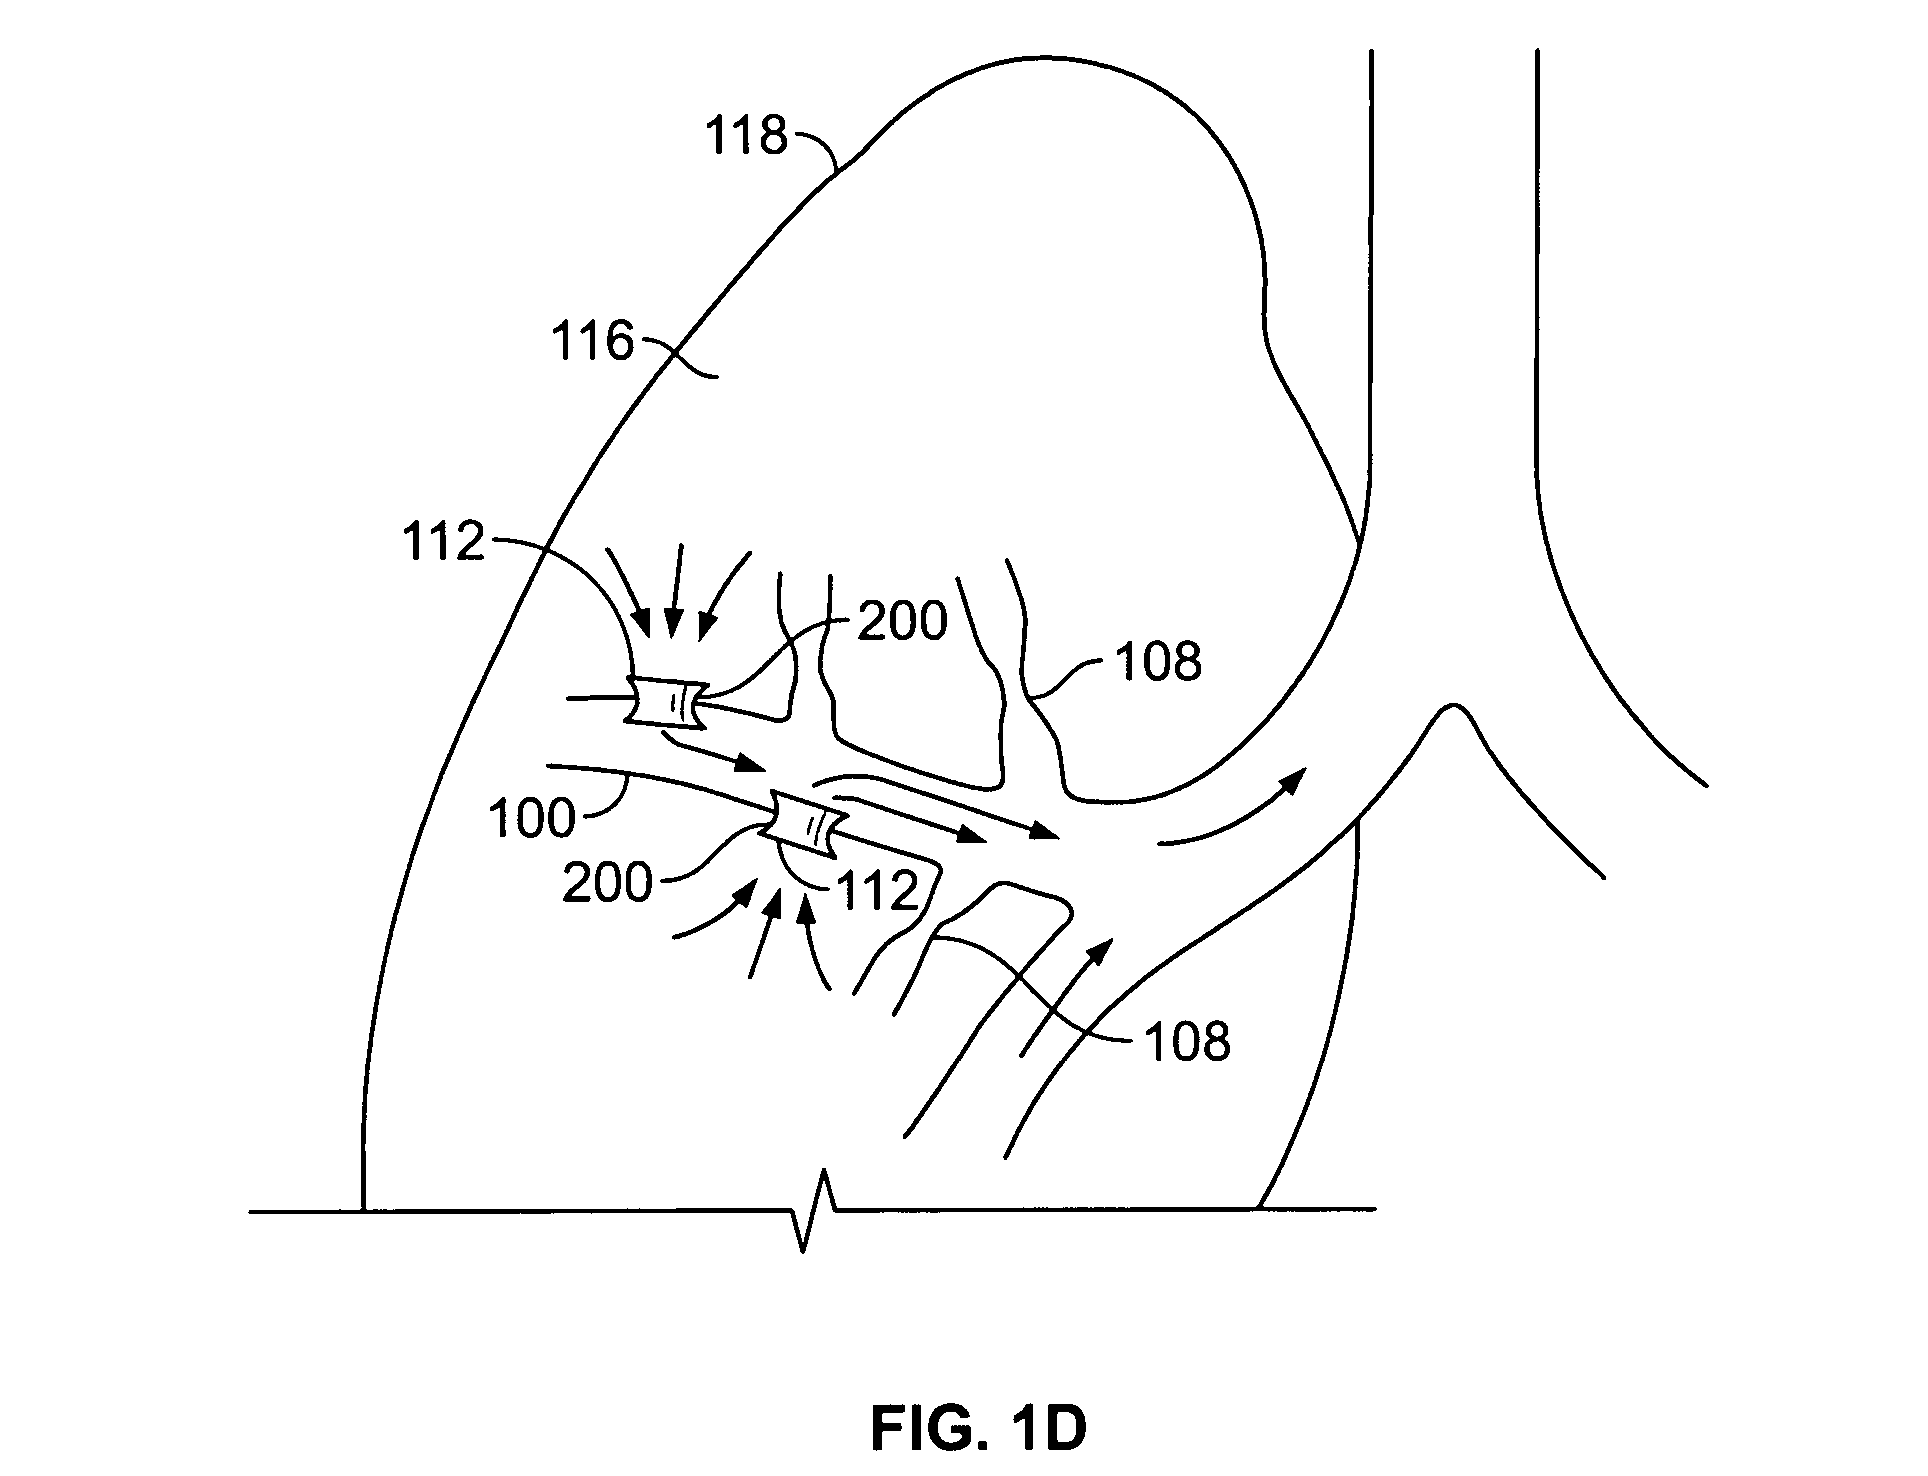 Methods and devices for maintaining patency of surgically created channels in a body organ